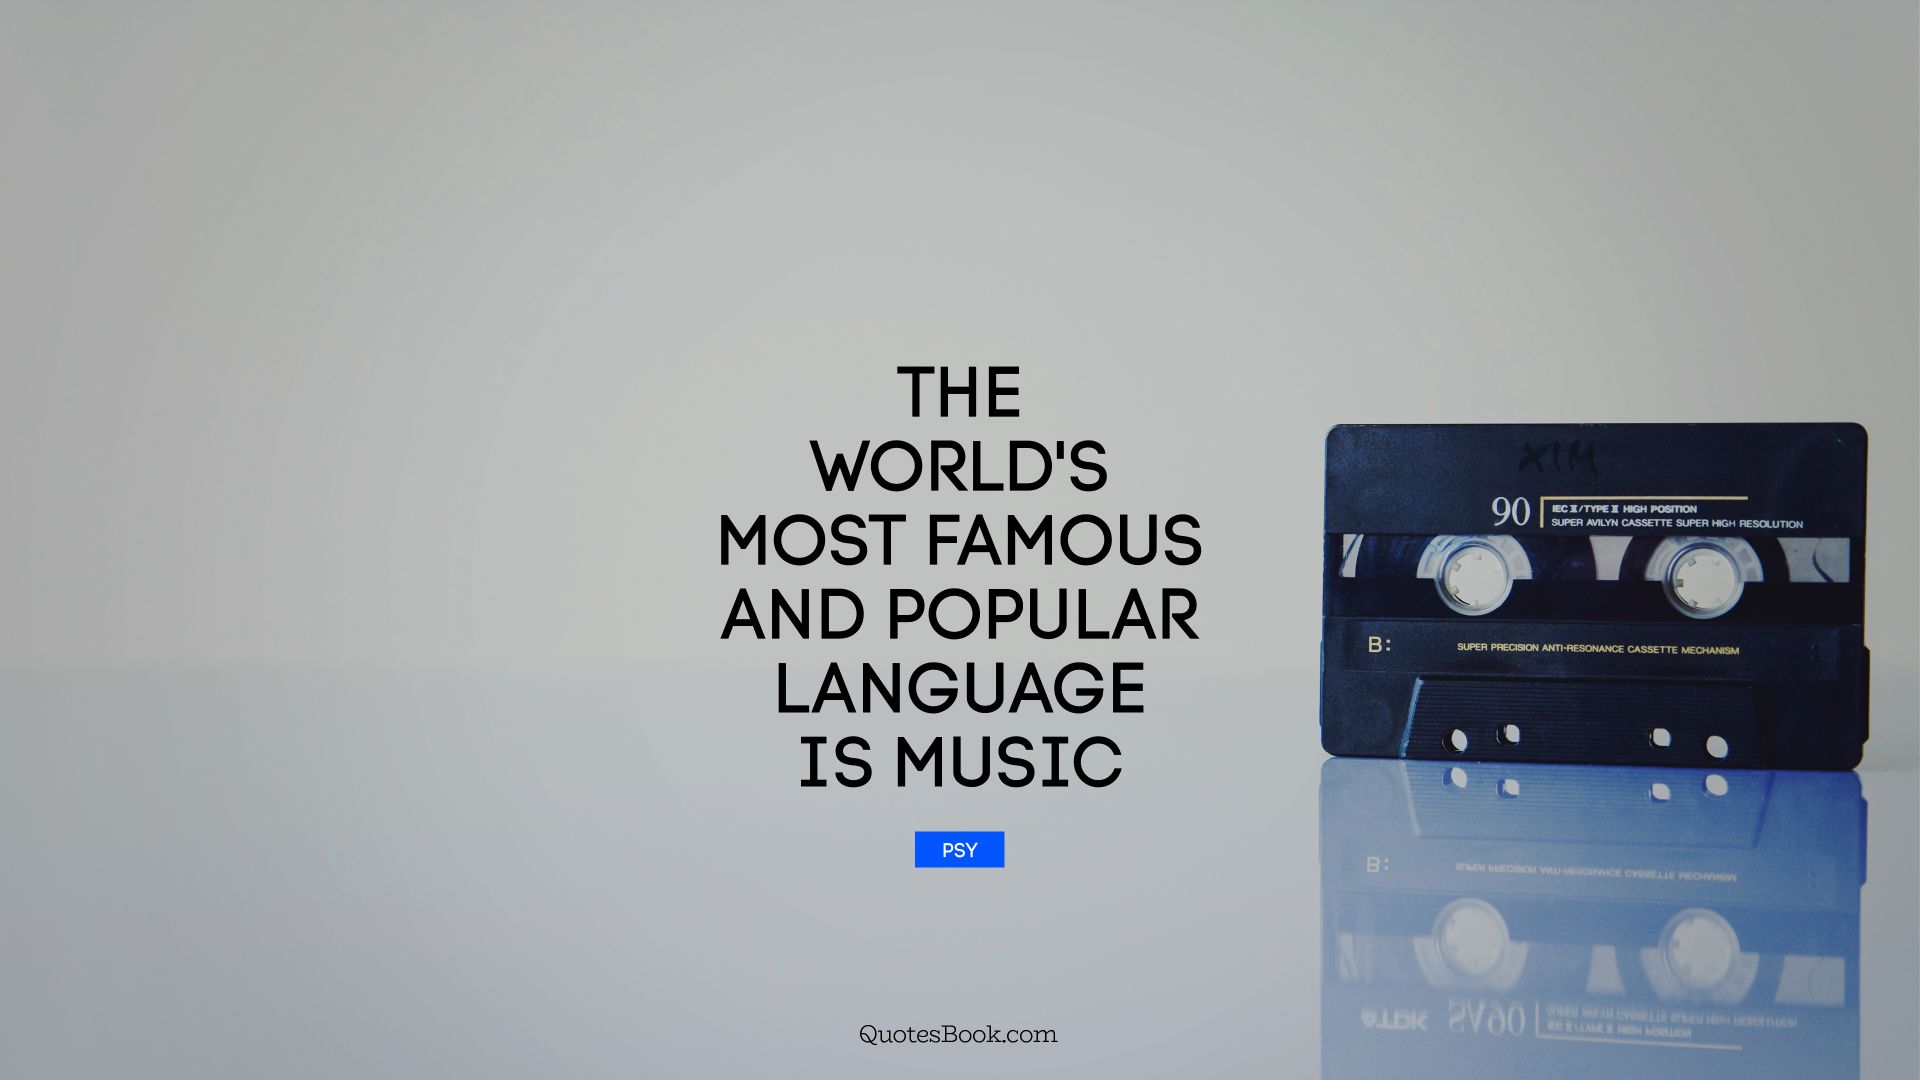 The world's most famous and popular language is music. - Quote by Psy